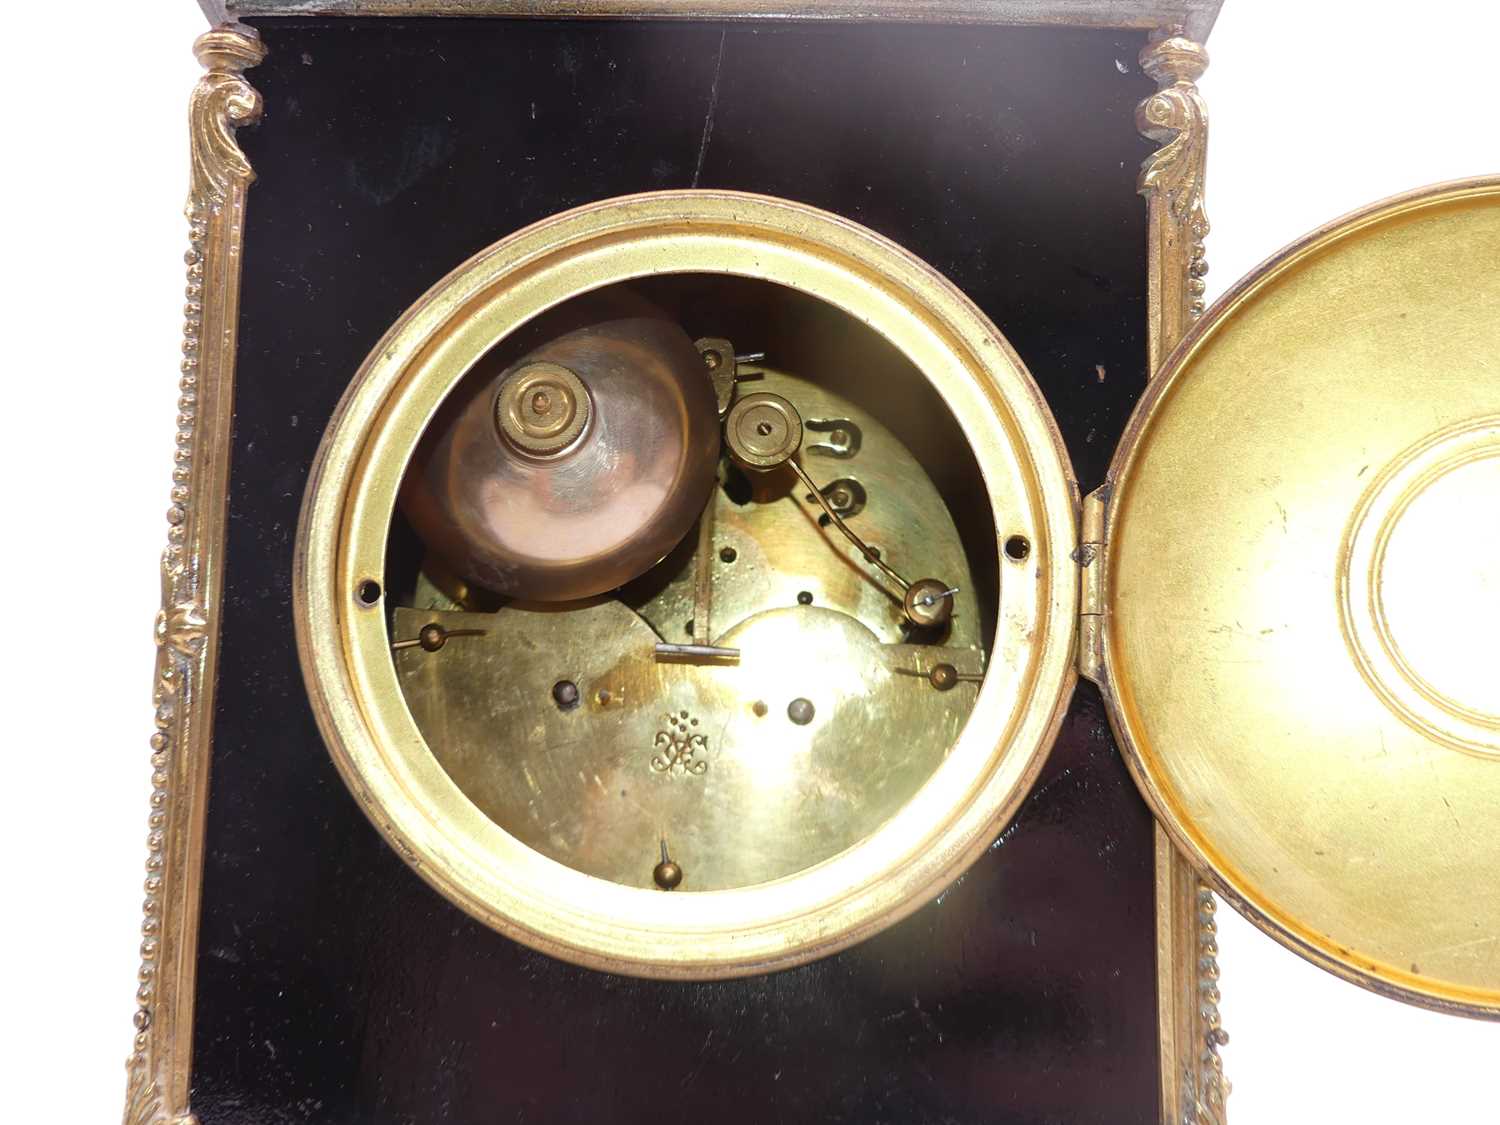 A 19th century French mantel clock, the enamel dial showing Roman numerals, the 8-day movement - Image 3 of 3